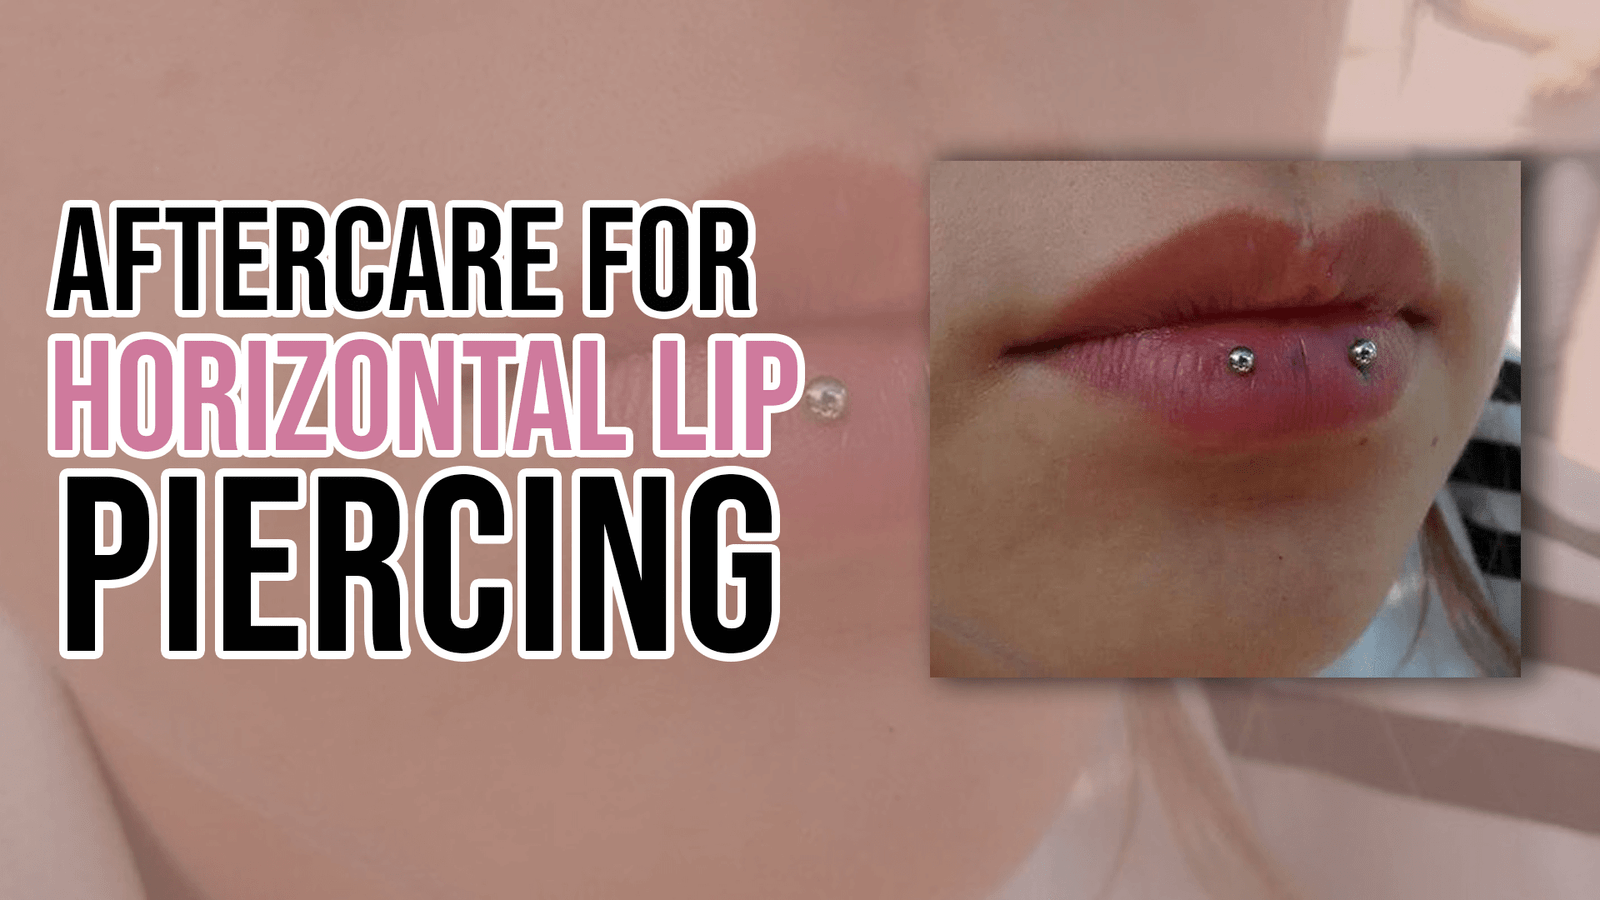 Aftercare for Horizontal Lip Piercing